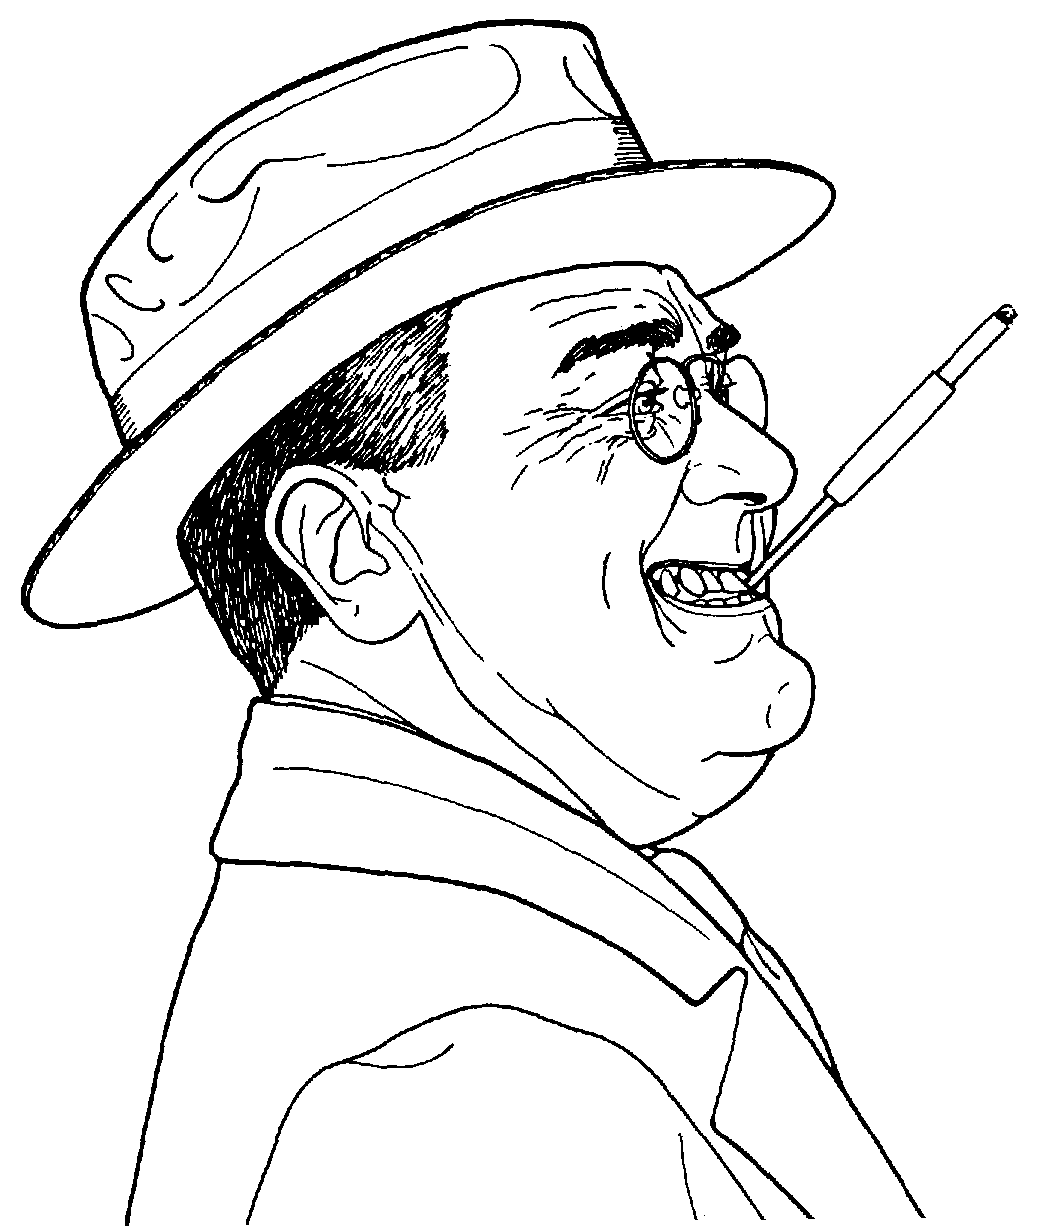 Politician clipart animated. Fdr cartoons main page